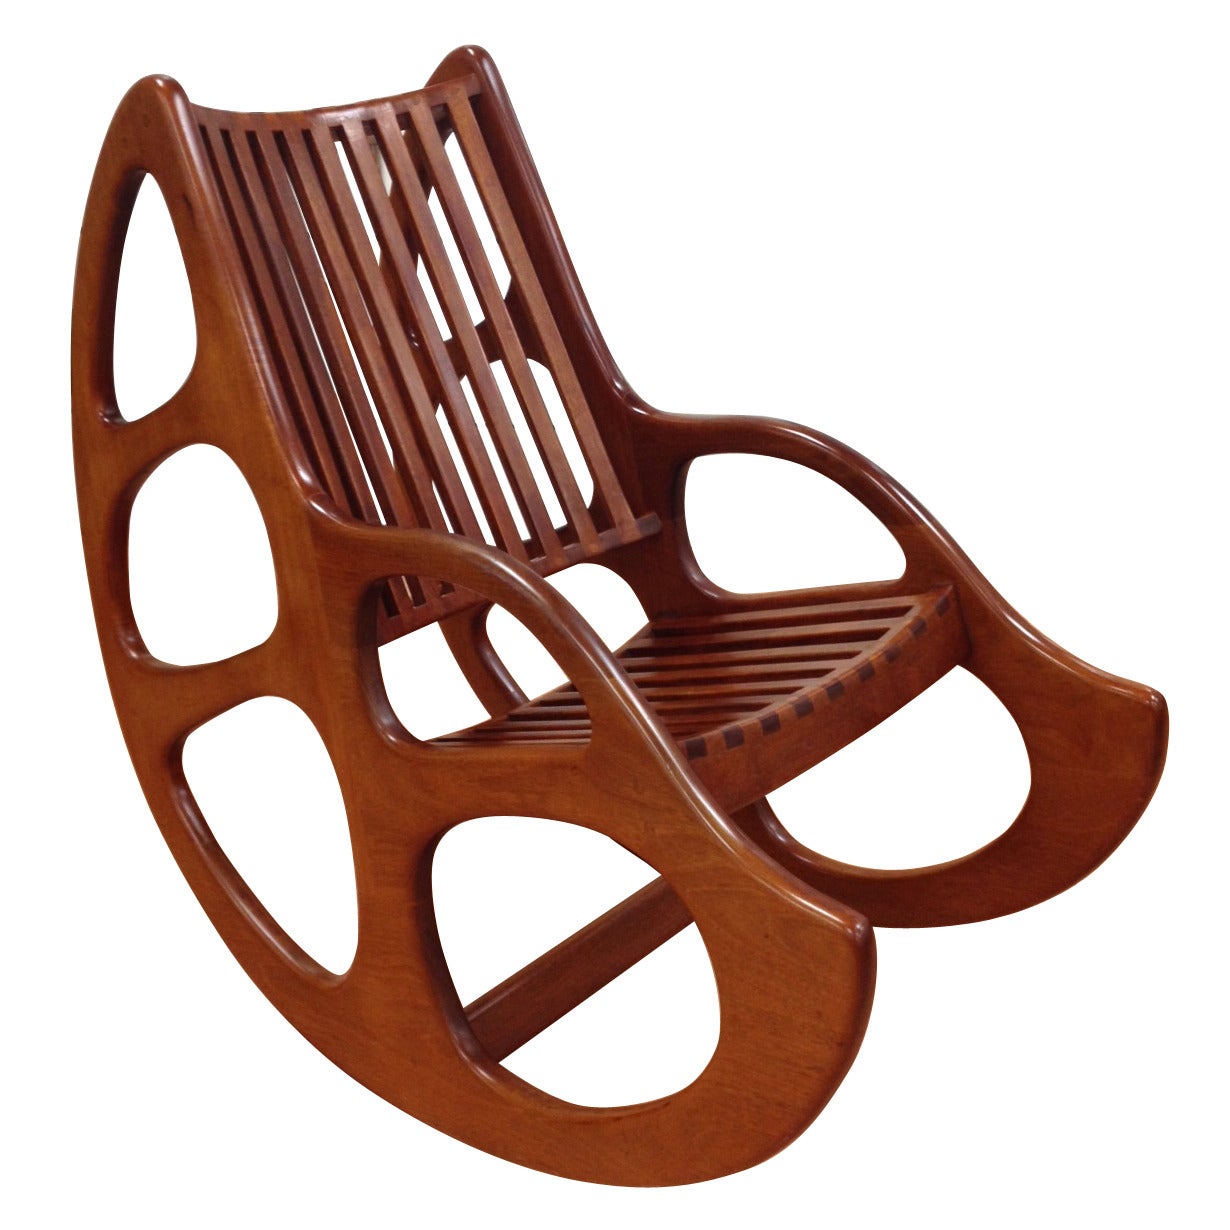 Hand-Crafted Studio Rocking Chair by Bill Biggs